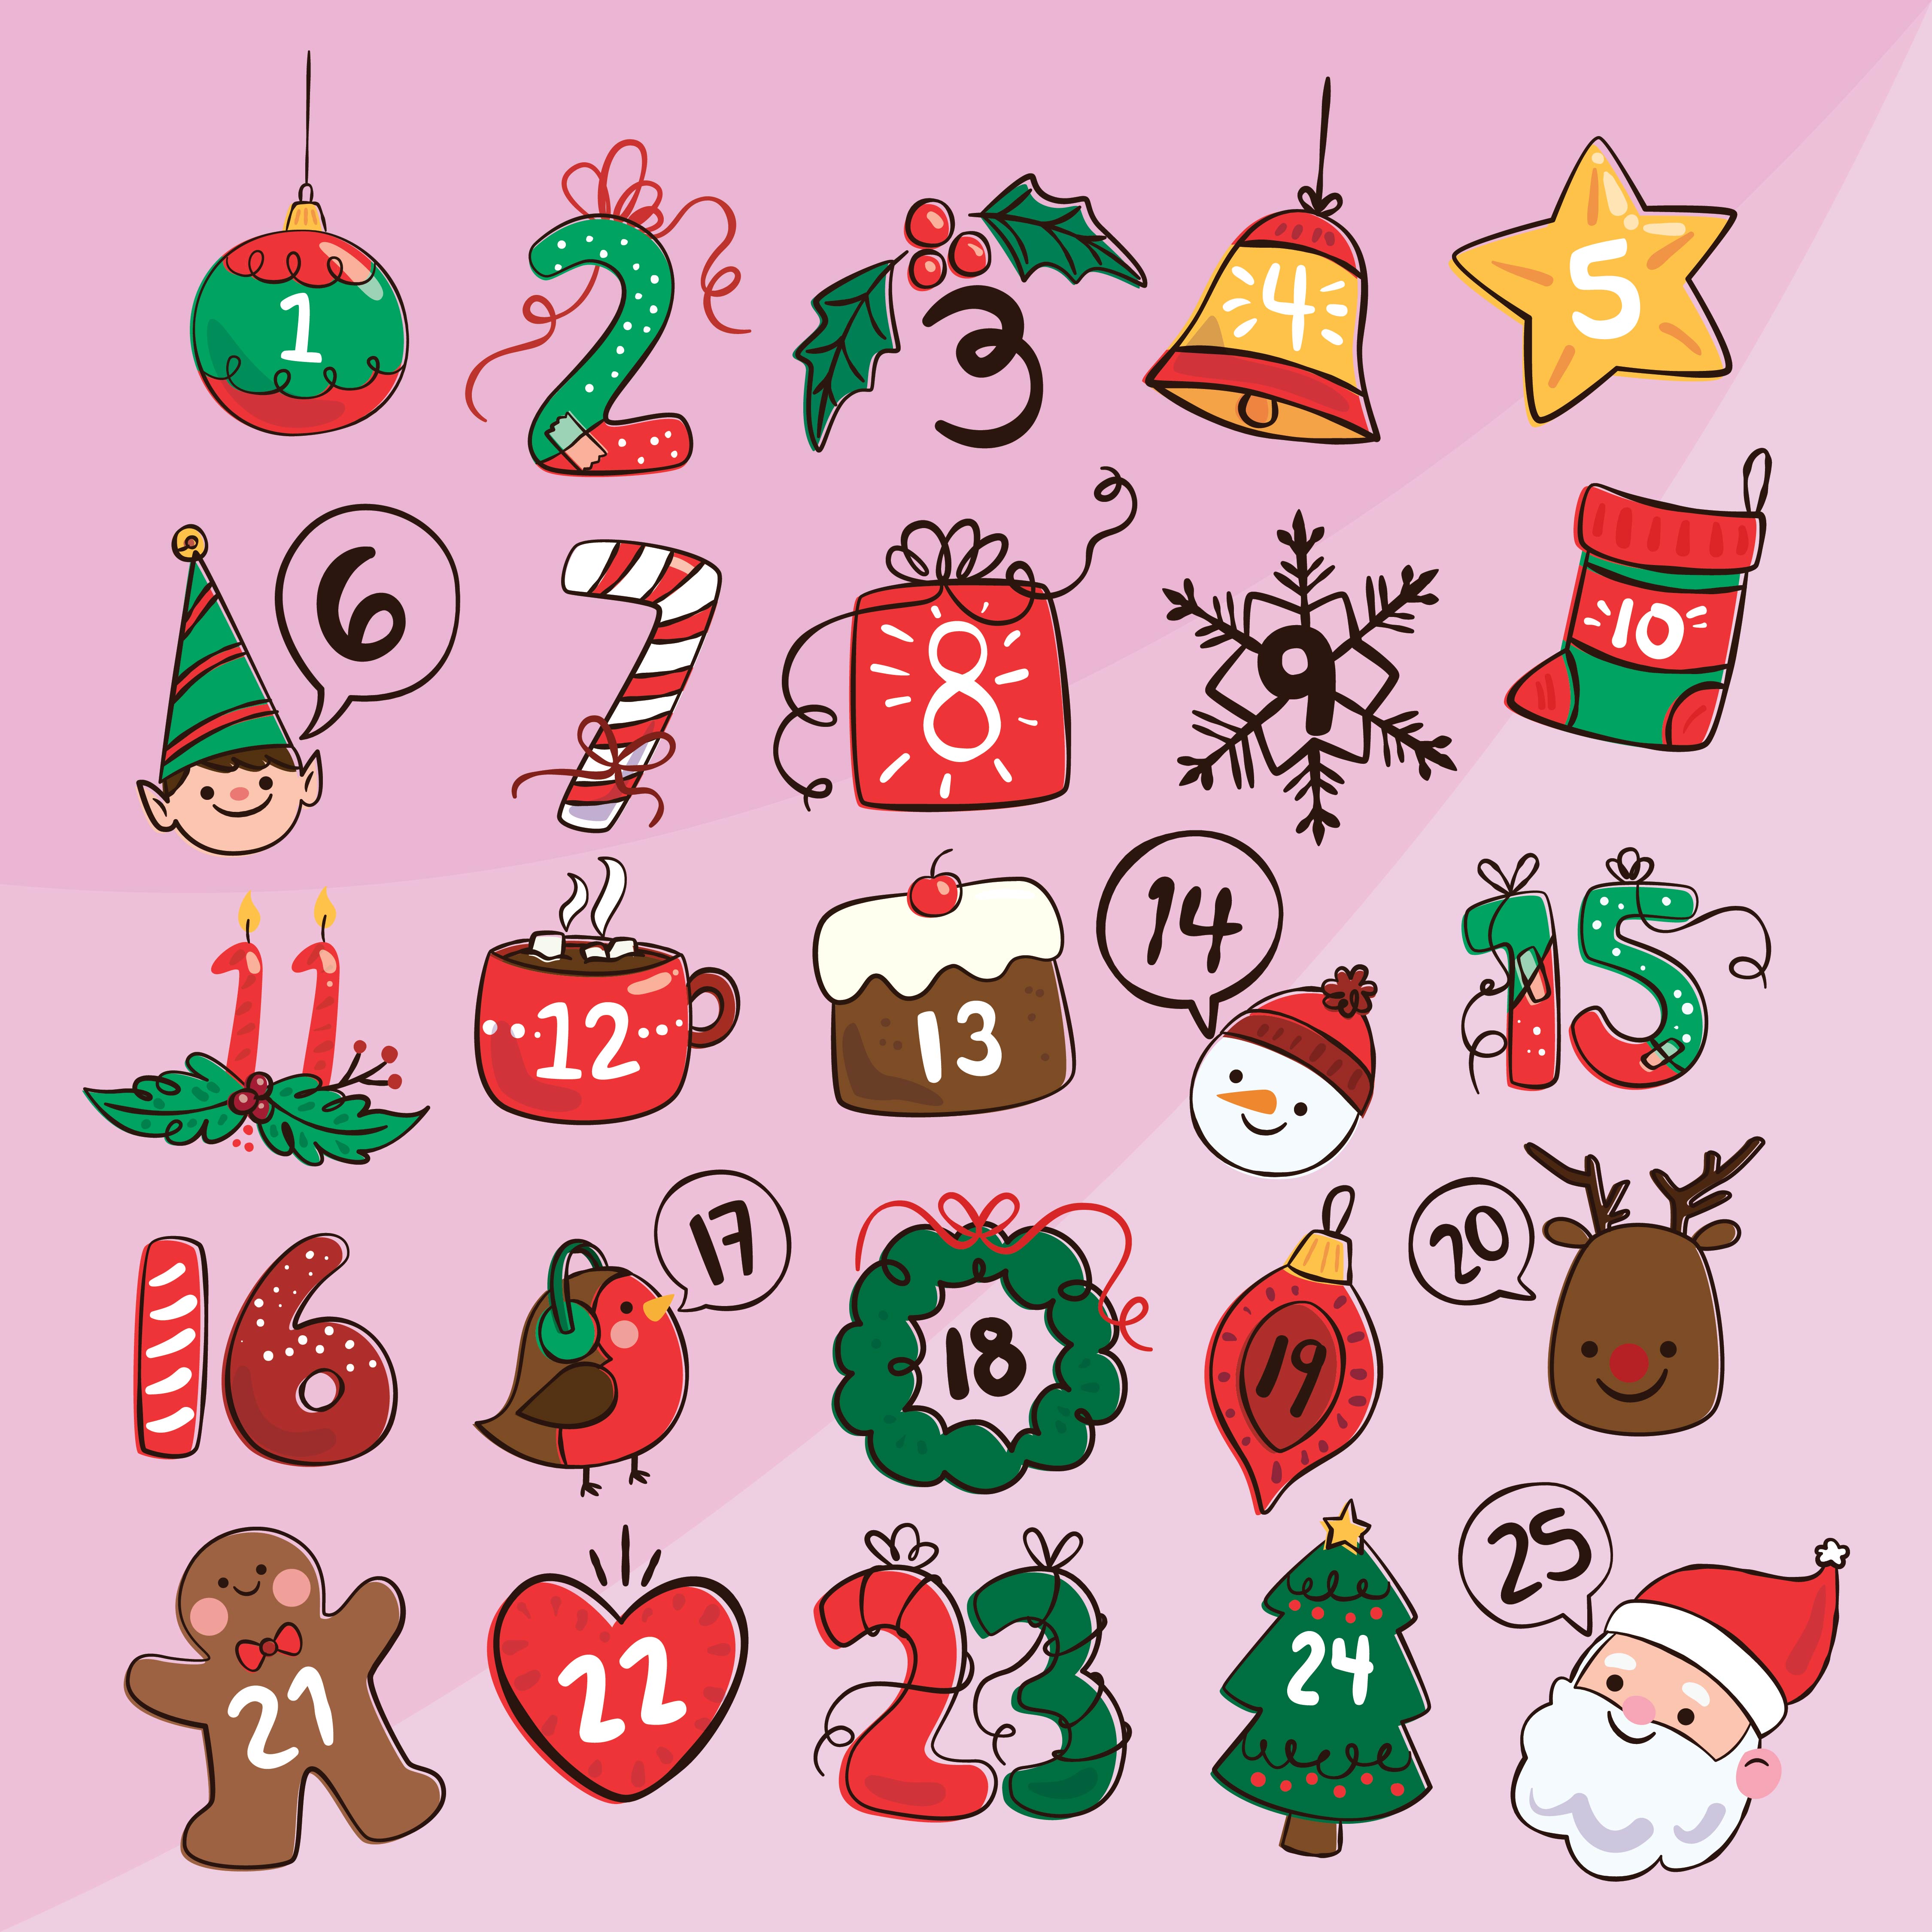 7-best-images-of-christmas-printable-number-stickers-free-printable